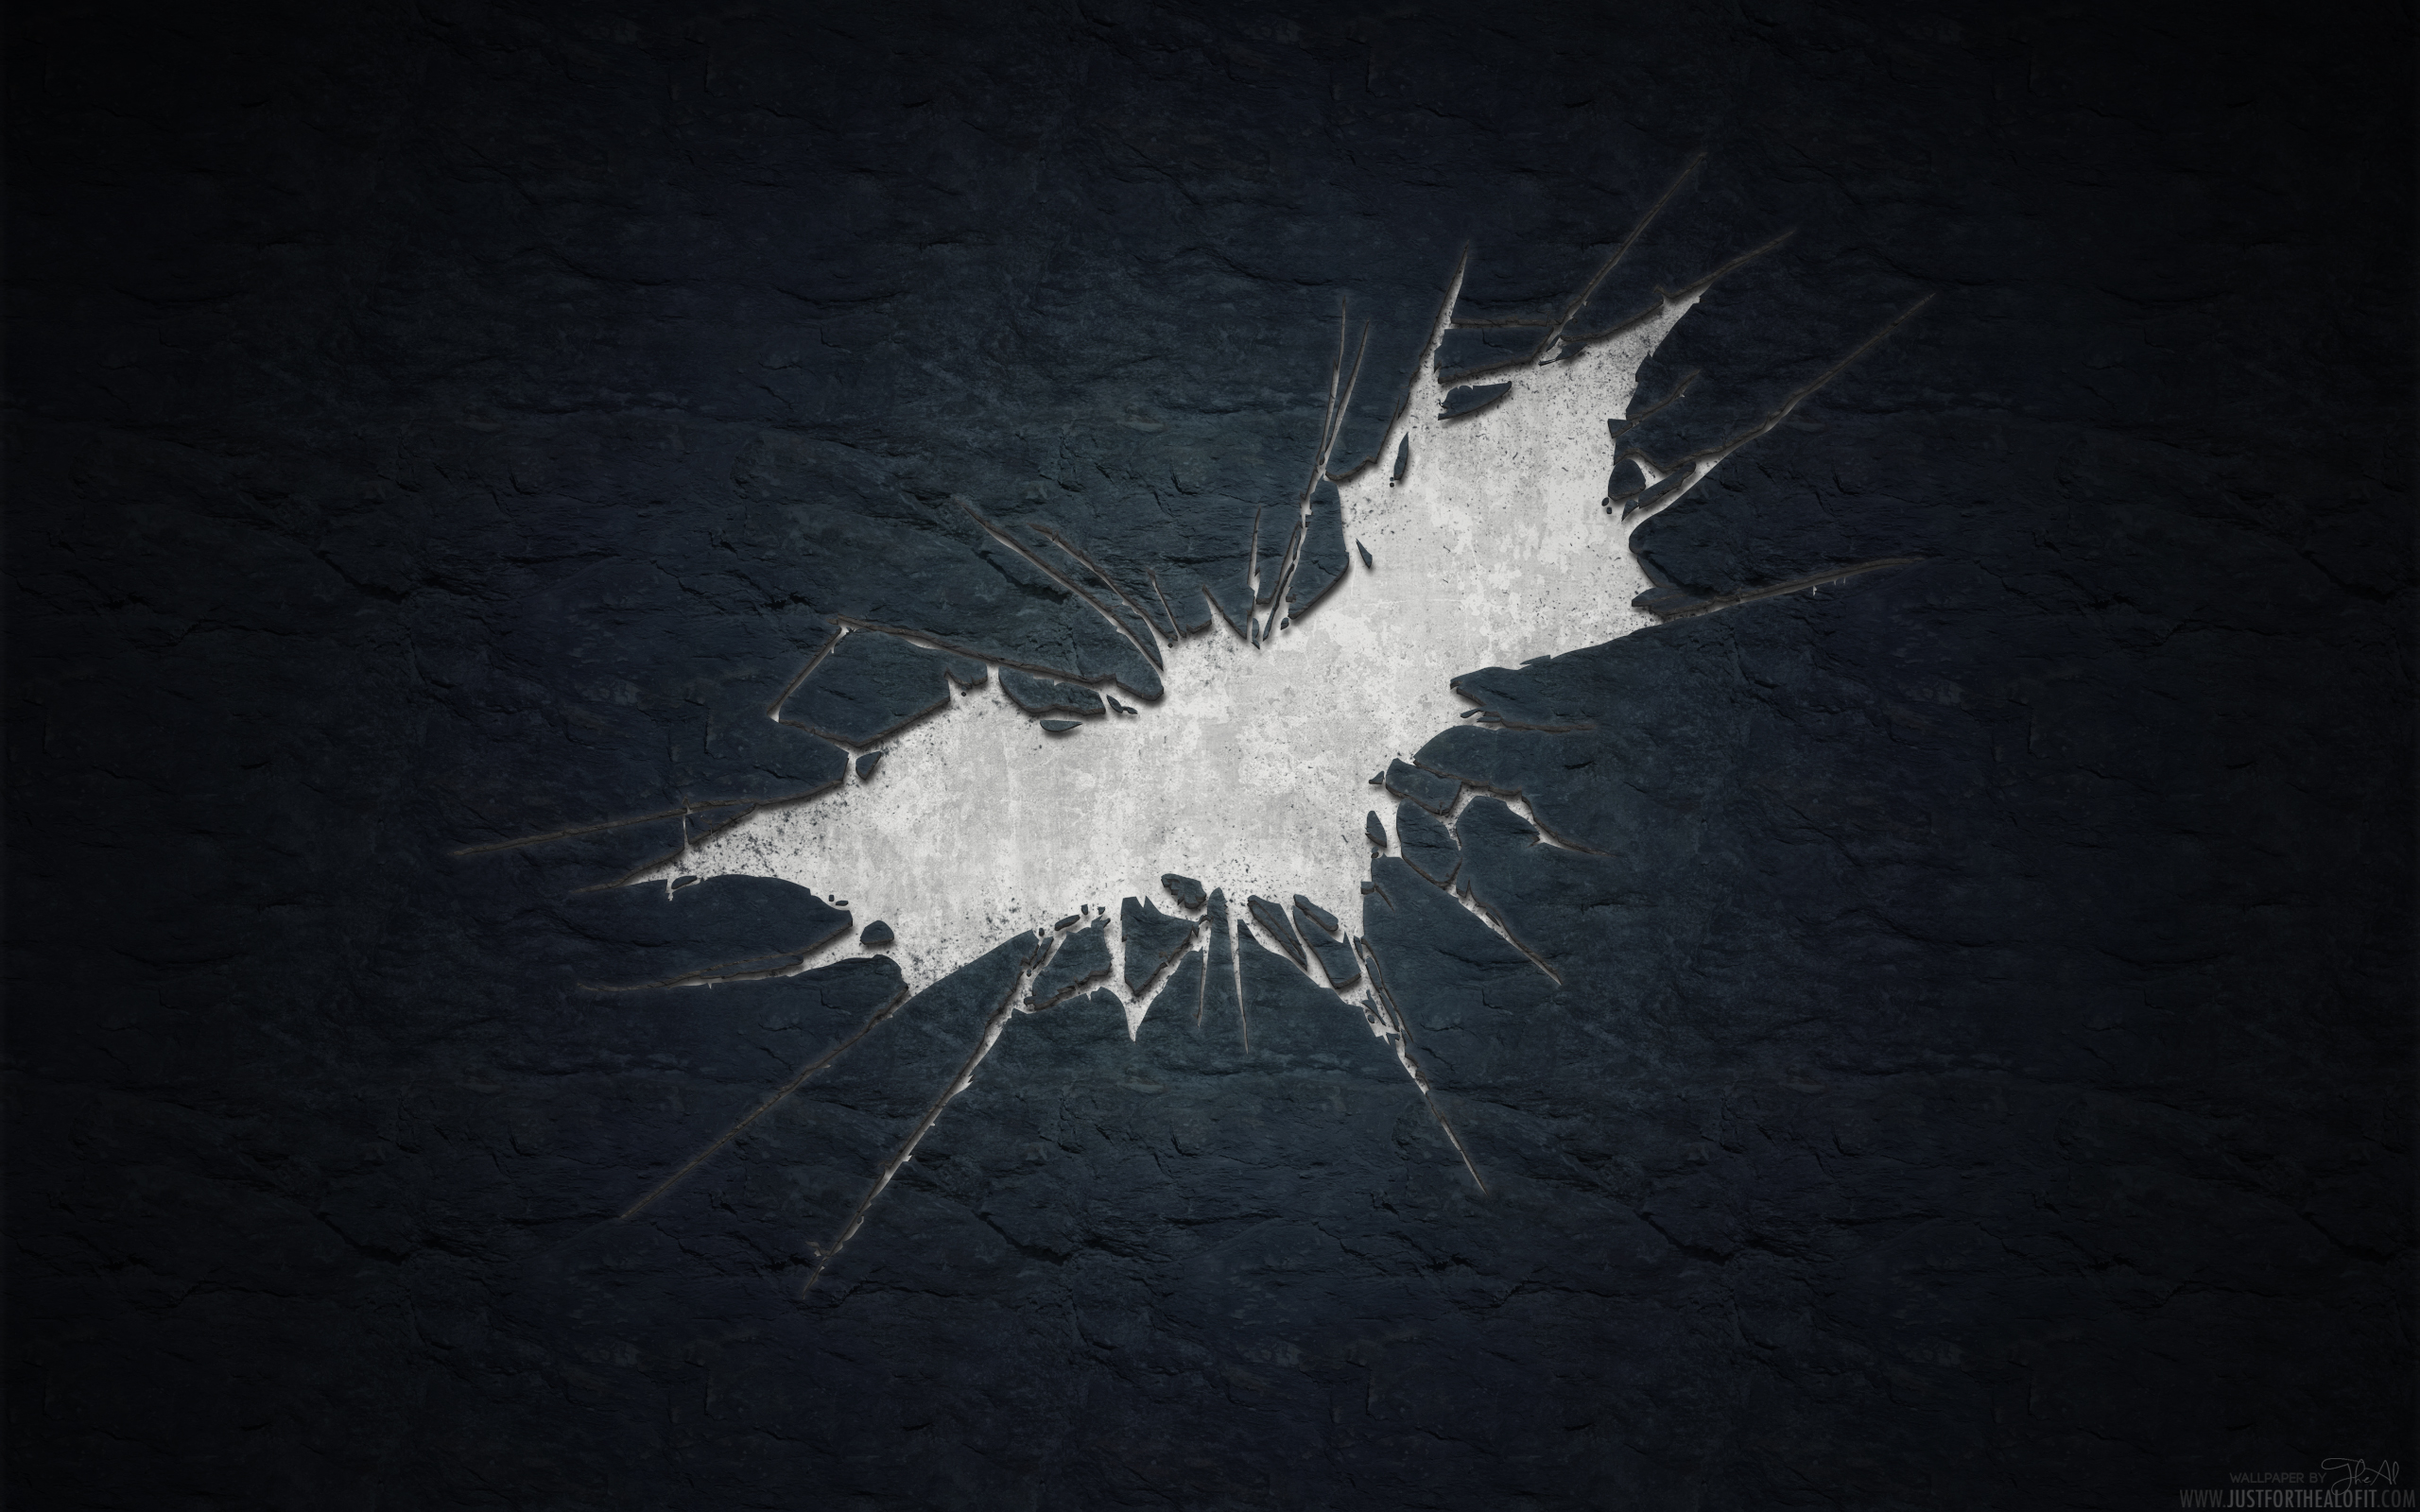 The Dark Knight Rises Wallpaper Set Awesome Wallpapers 2560x1600